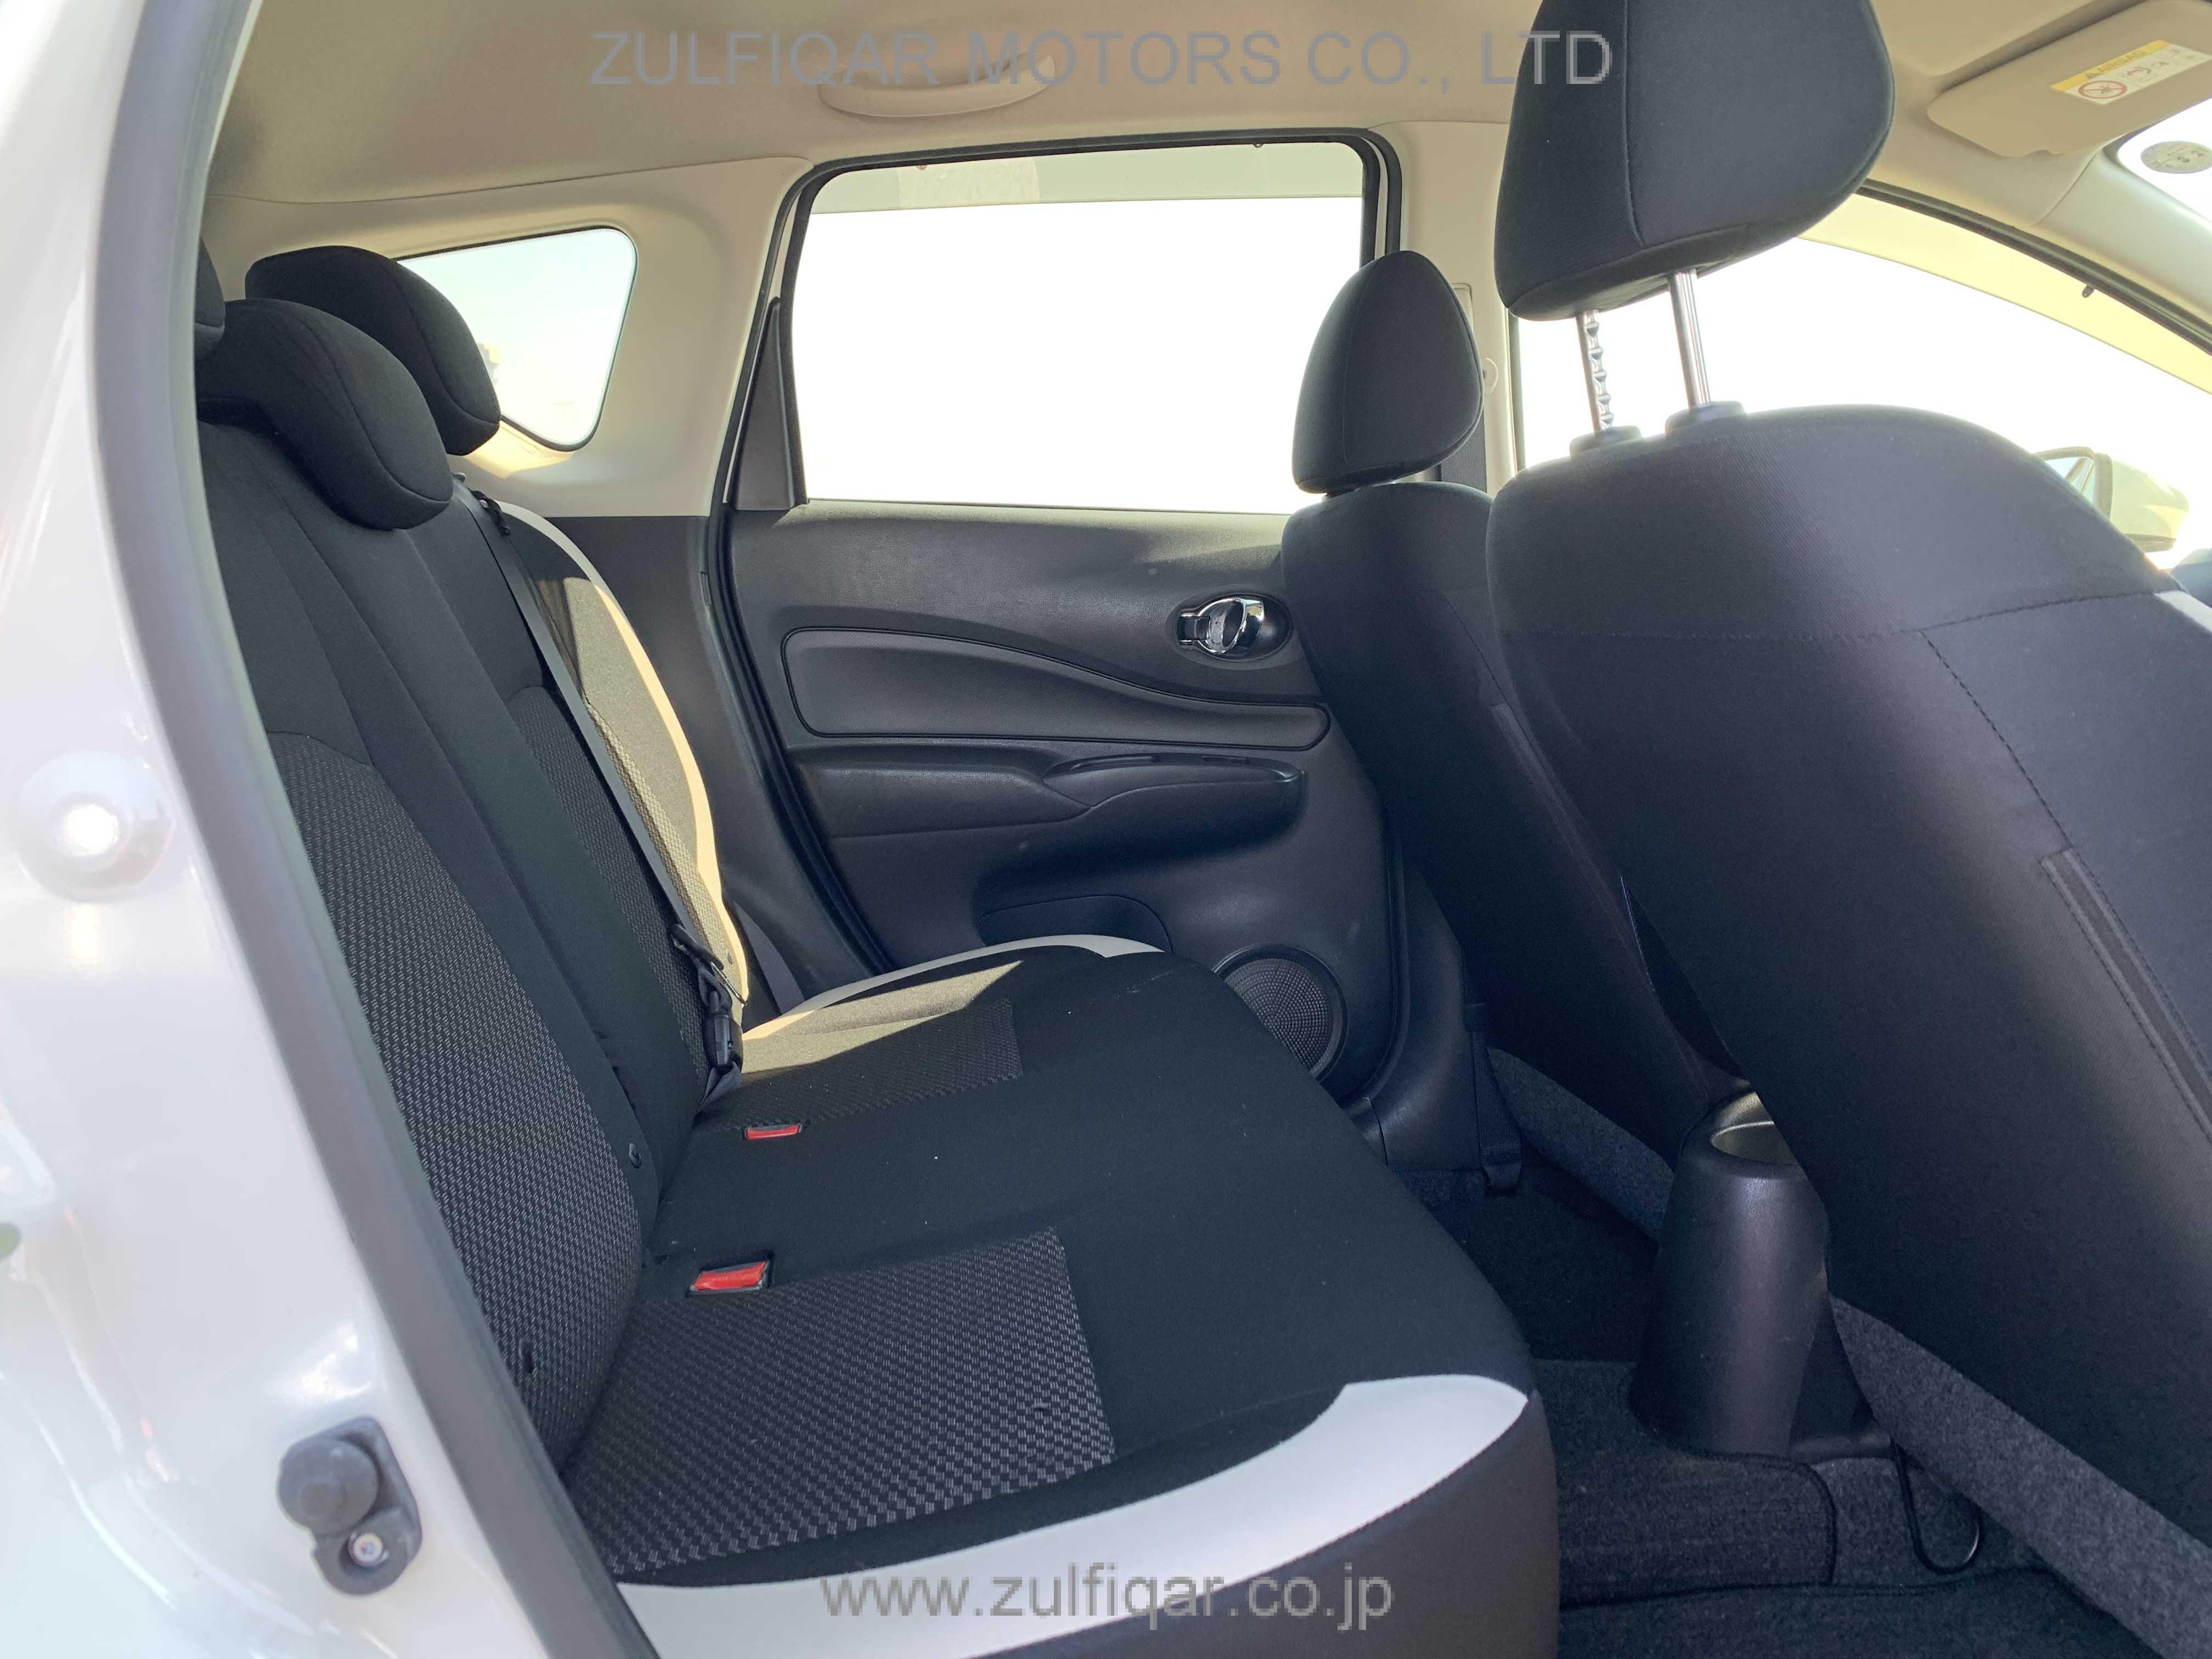 NISSAN NOTE 2018 Image 26